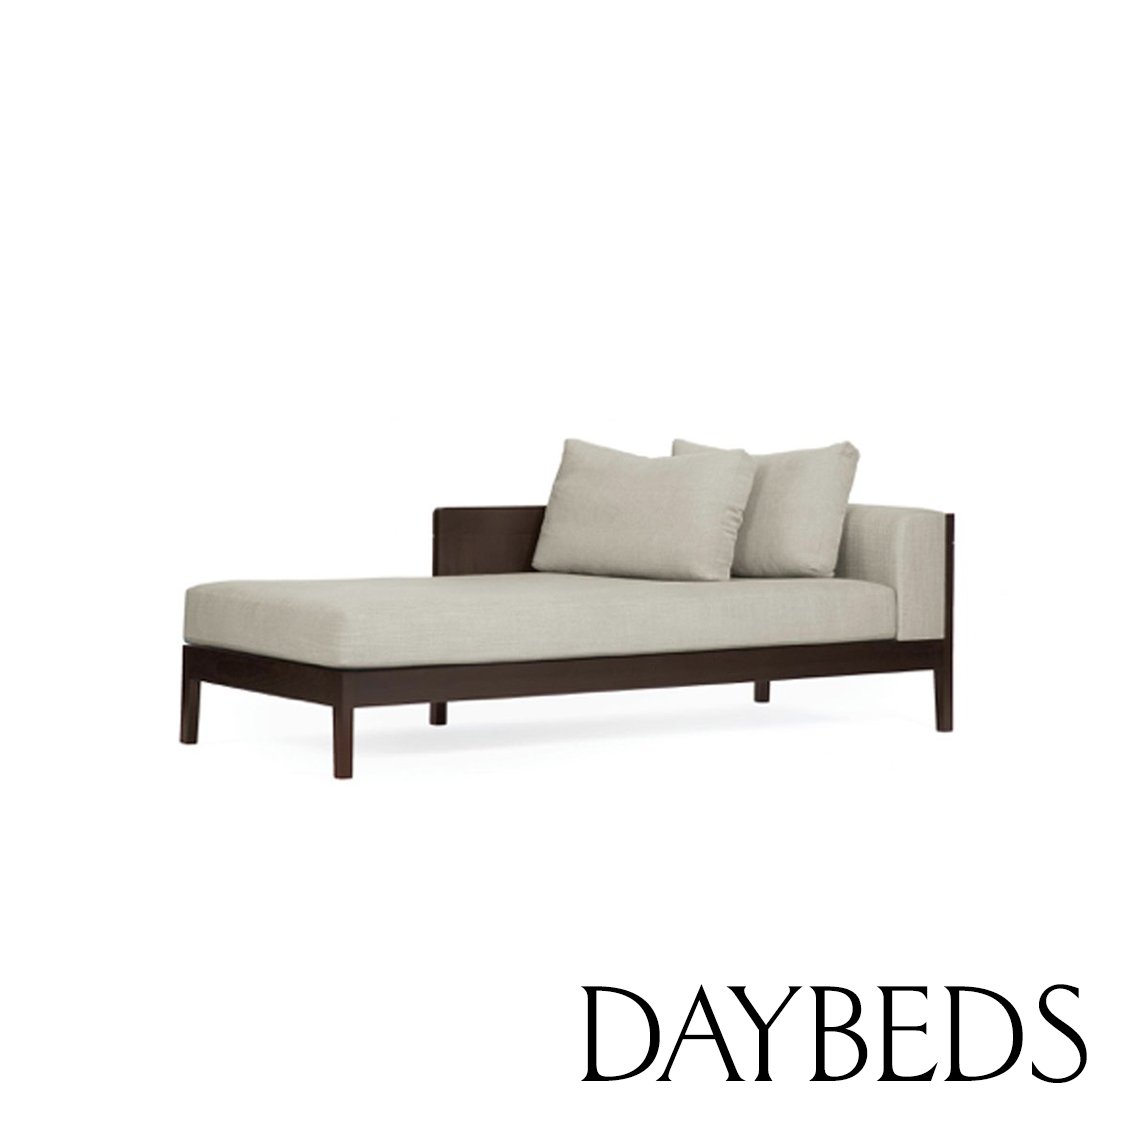 all daybeds.jpg